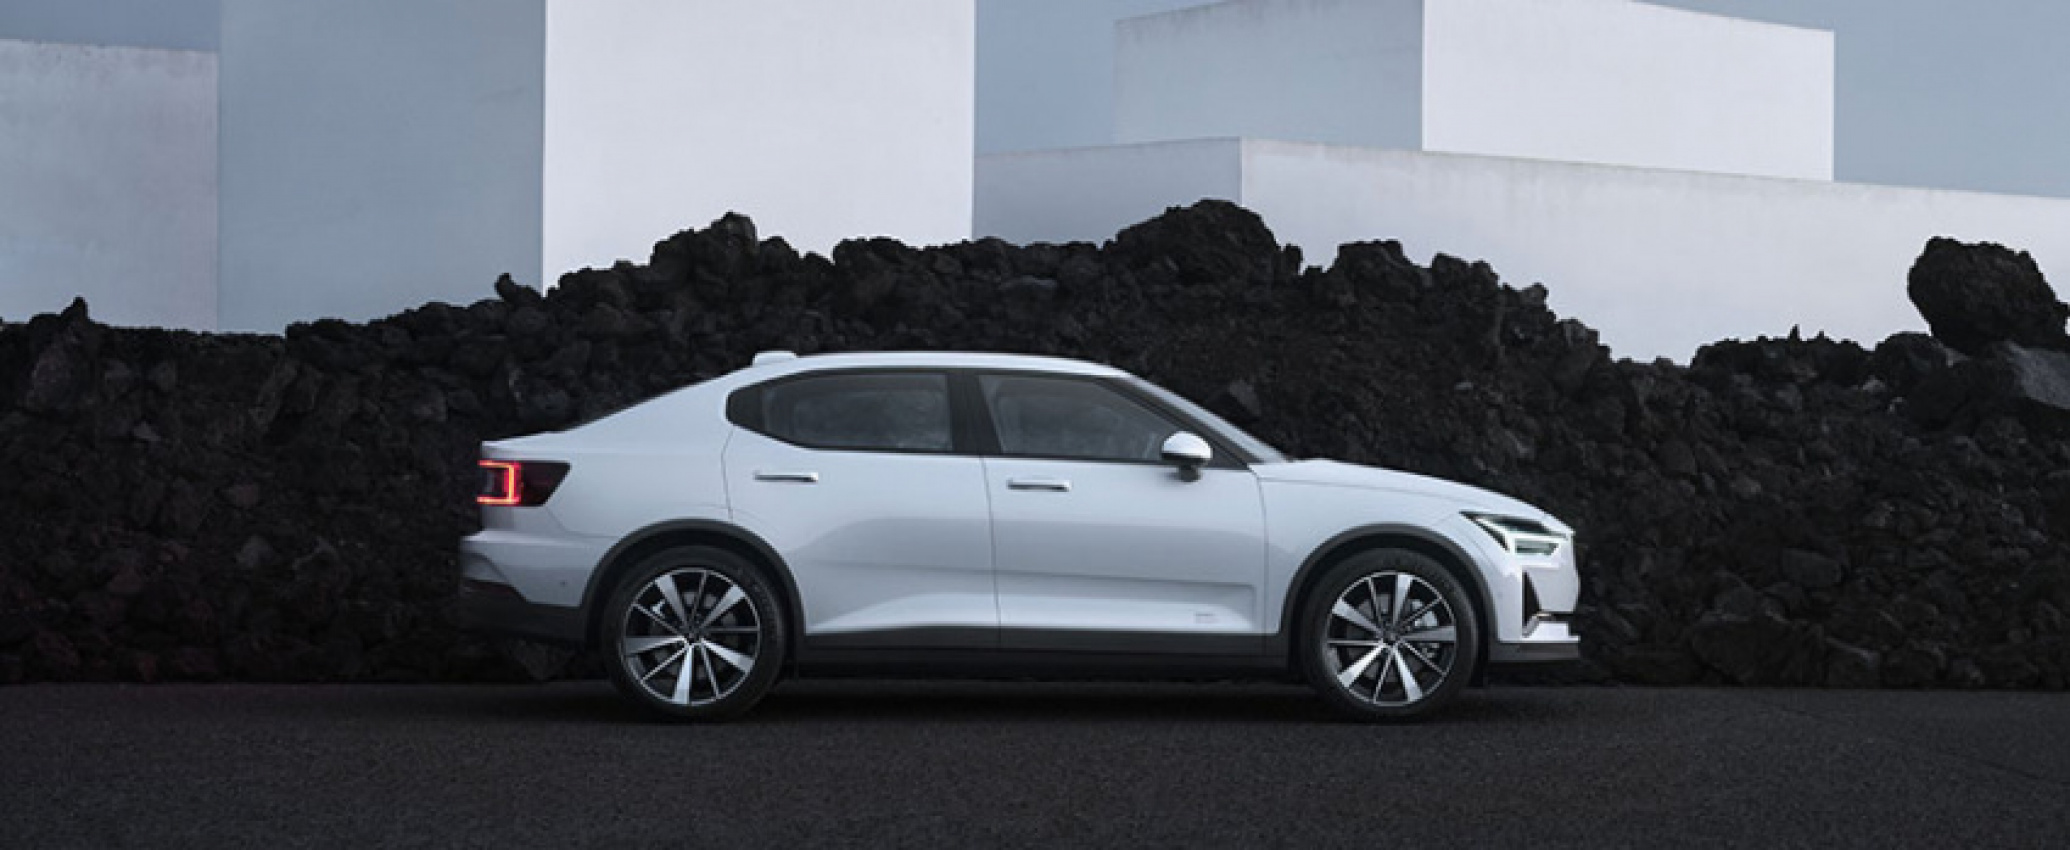 autos, cars, polestar, android, android, polestar 2 comes with a wide choice of equipment options. check details here!